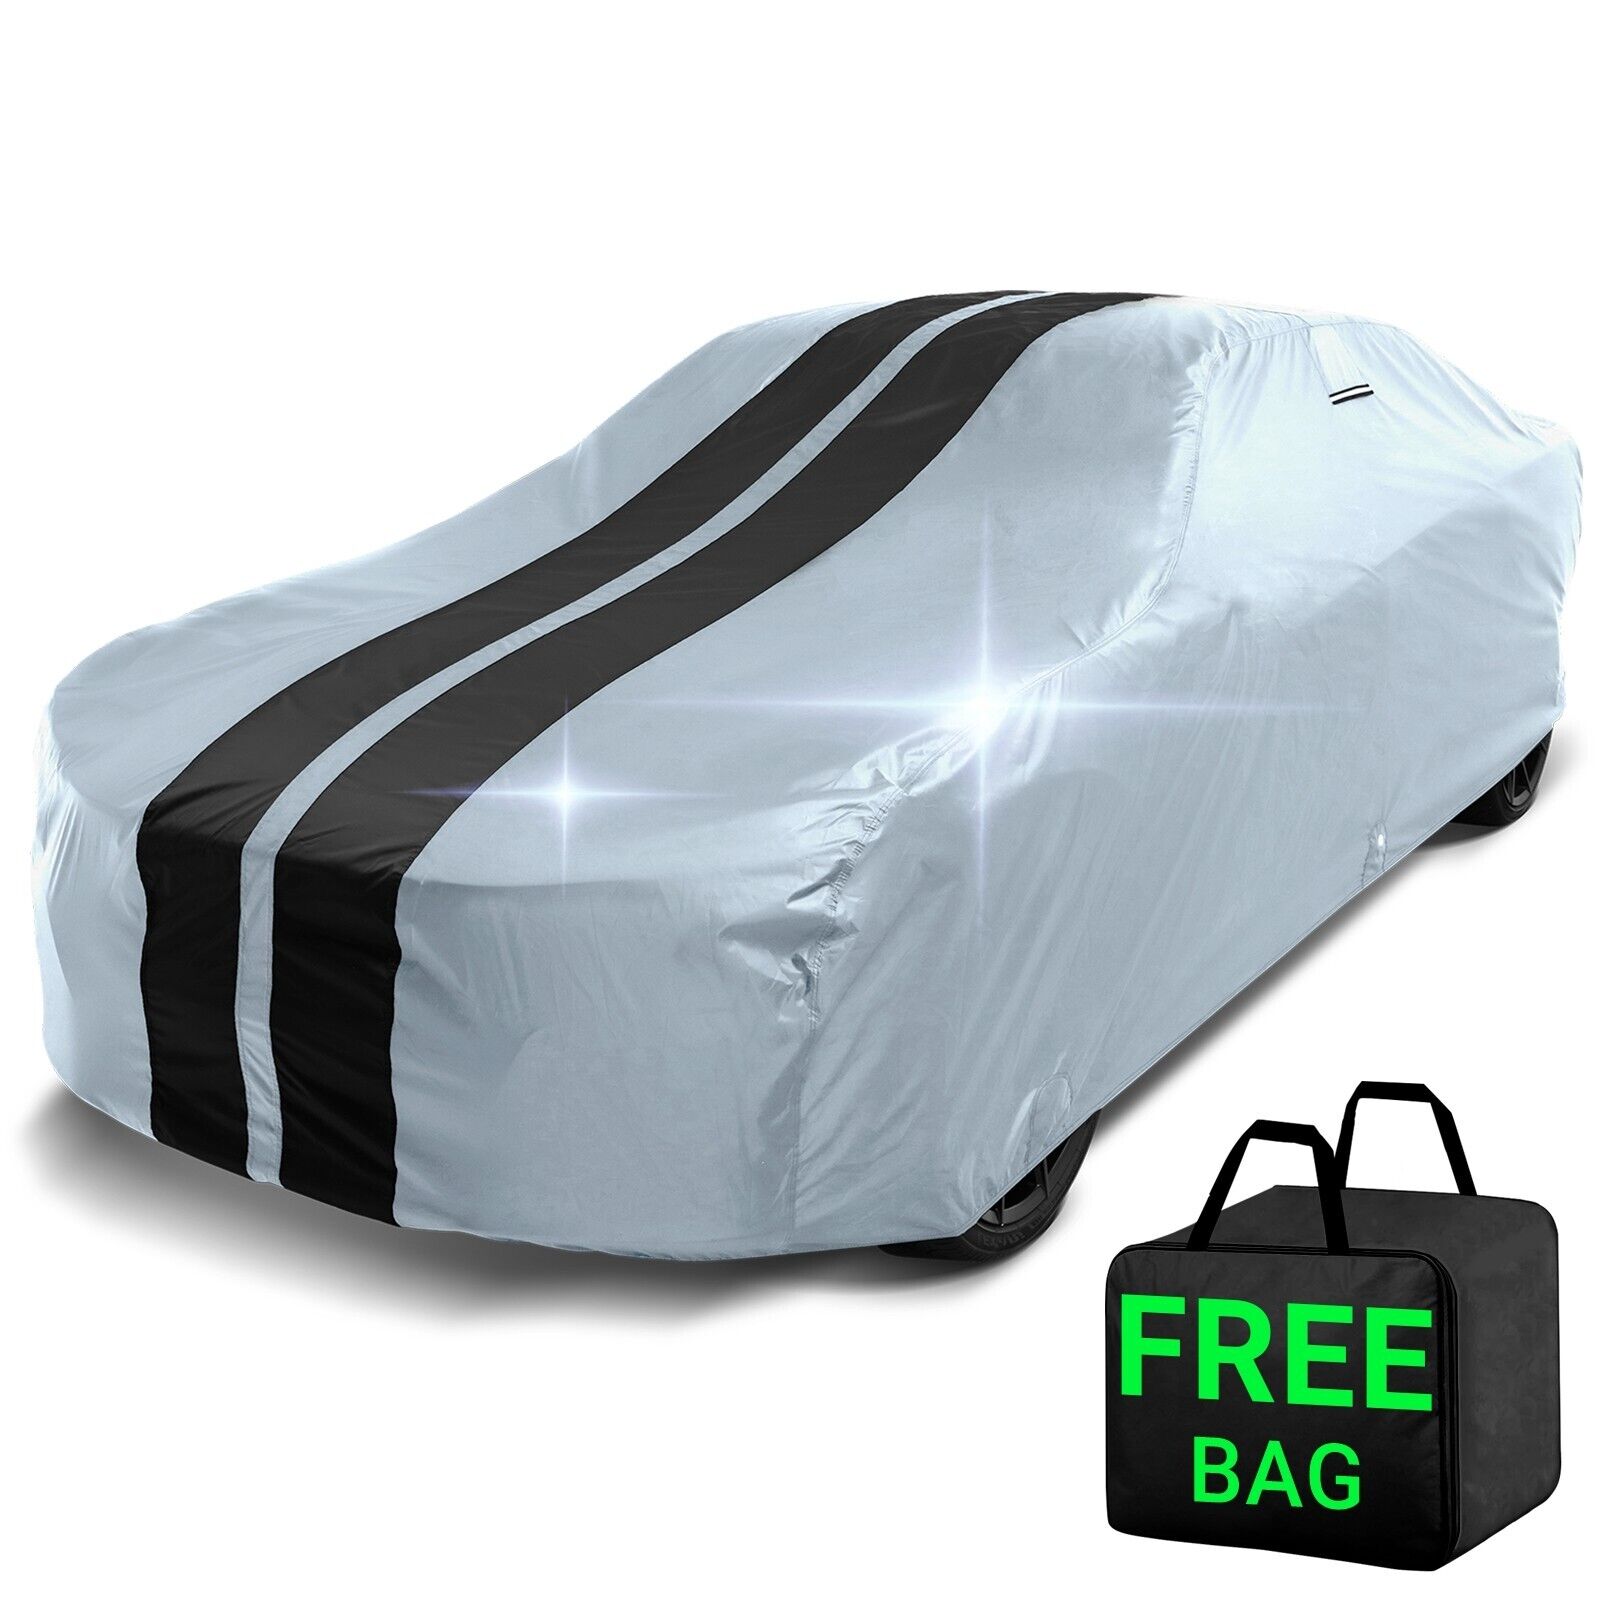 1956-1967 Renault Dauphine Custom Car Cover - All-Weather Waterproof Protection